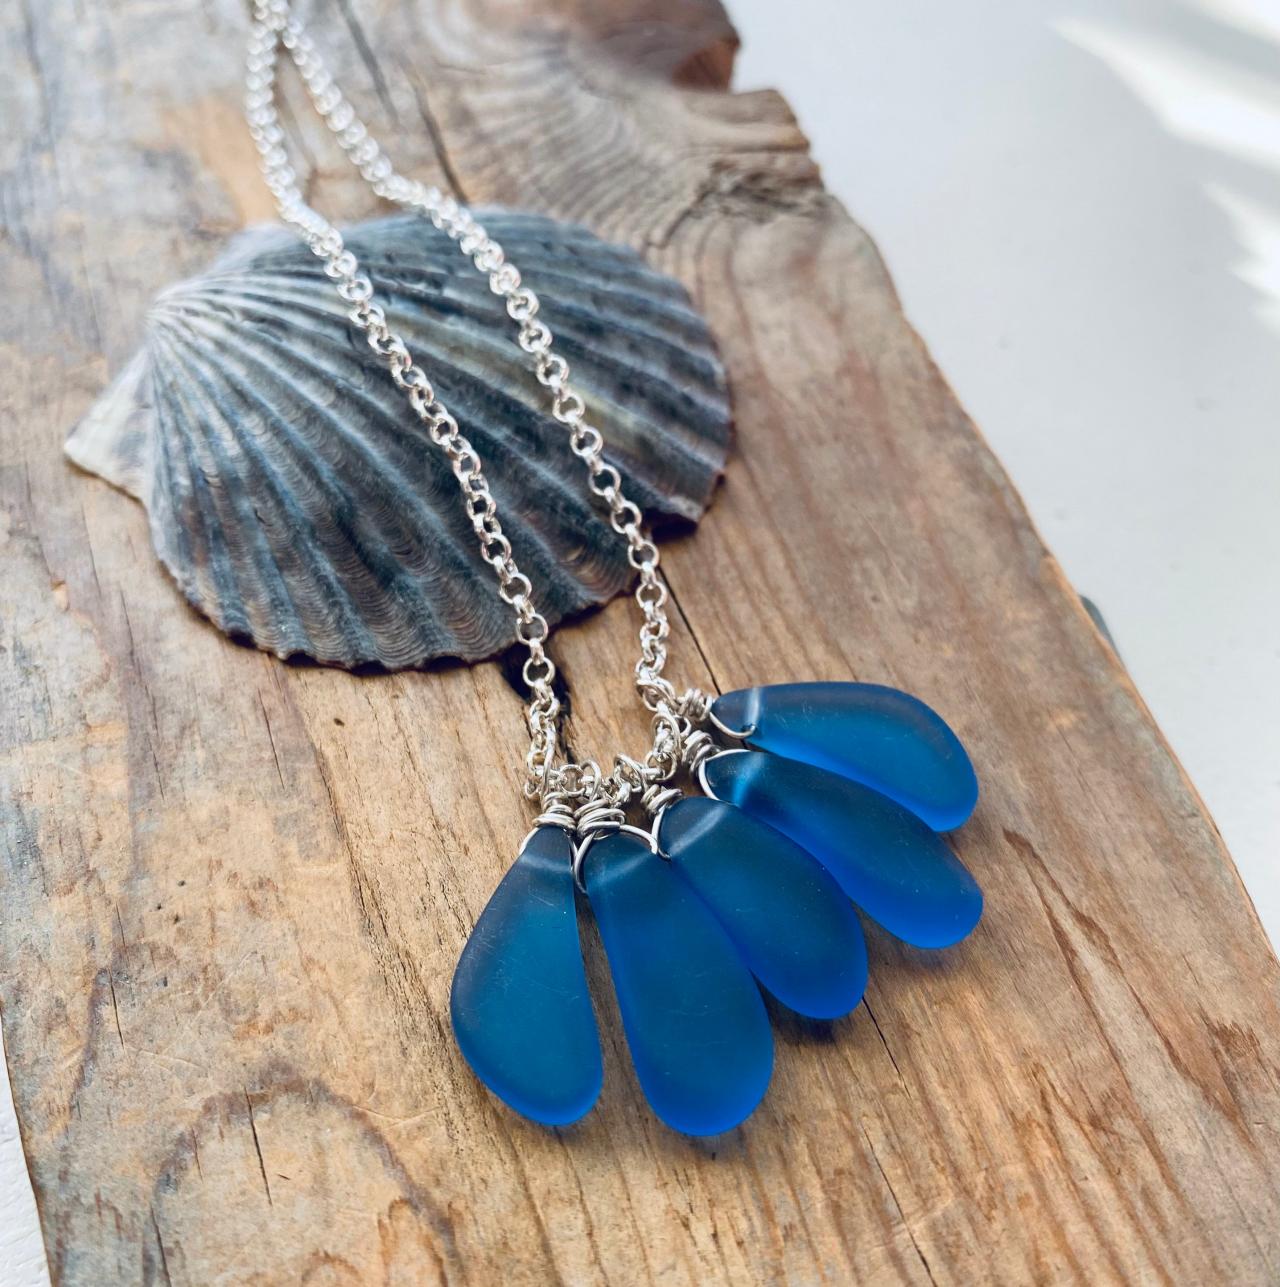 Sea Glass Necklace - Mermaid's Tears. Sterling Silver Cobalt Blue Summer Fashion Beachy Mothers Day Jewelry Recycled Glass